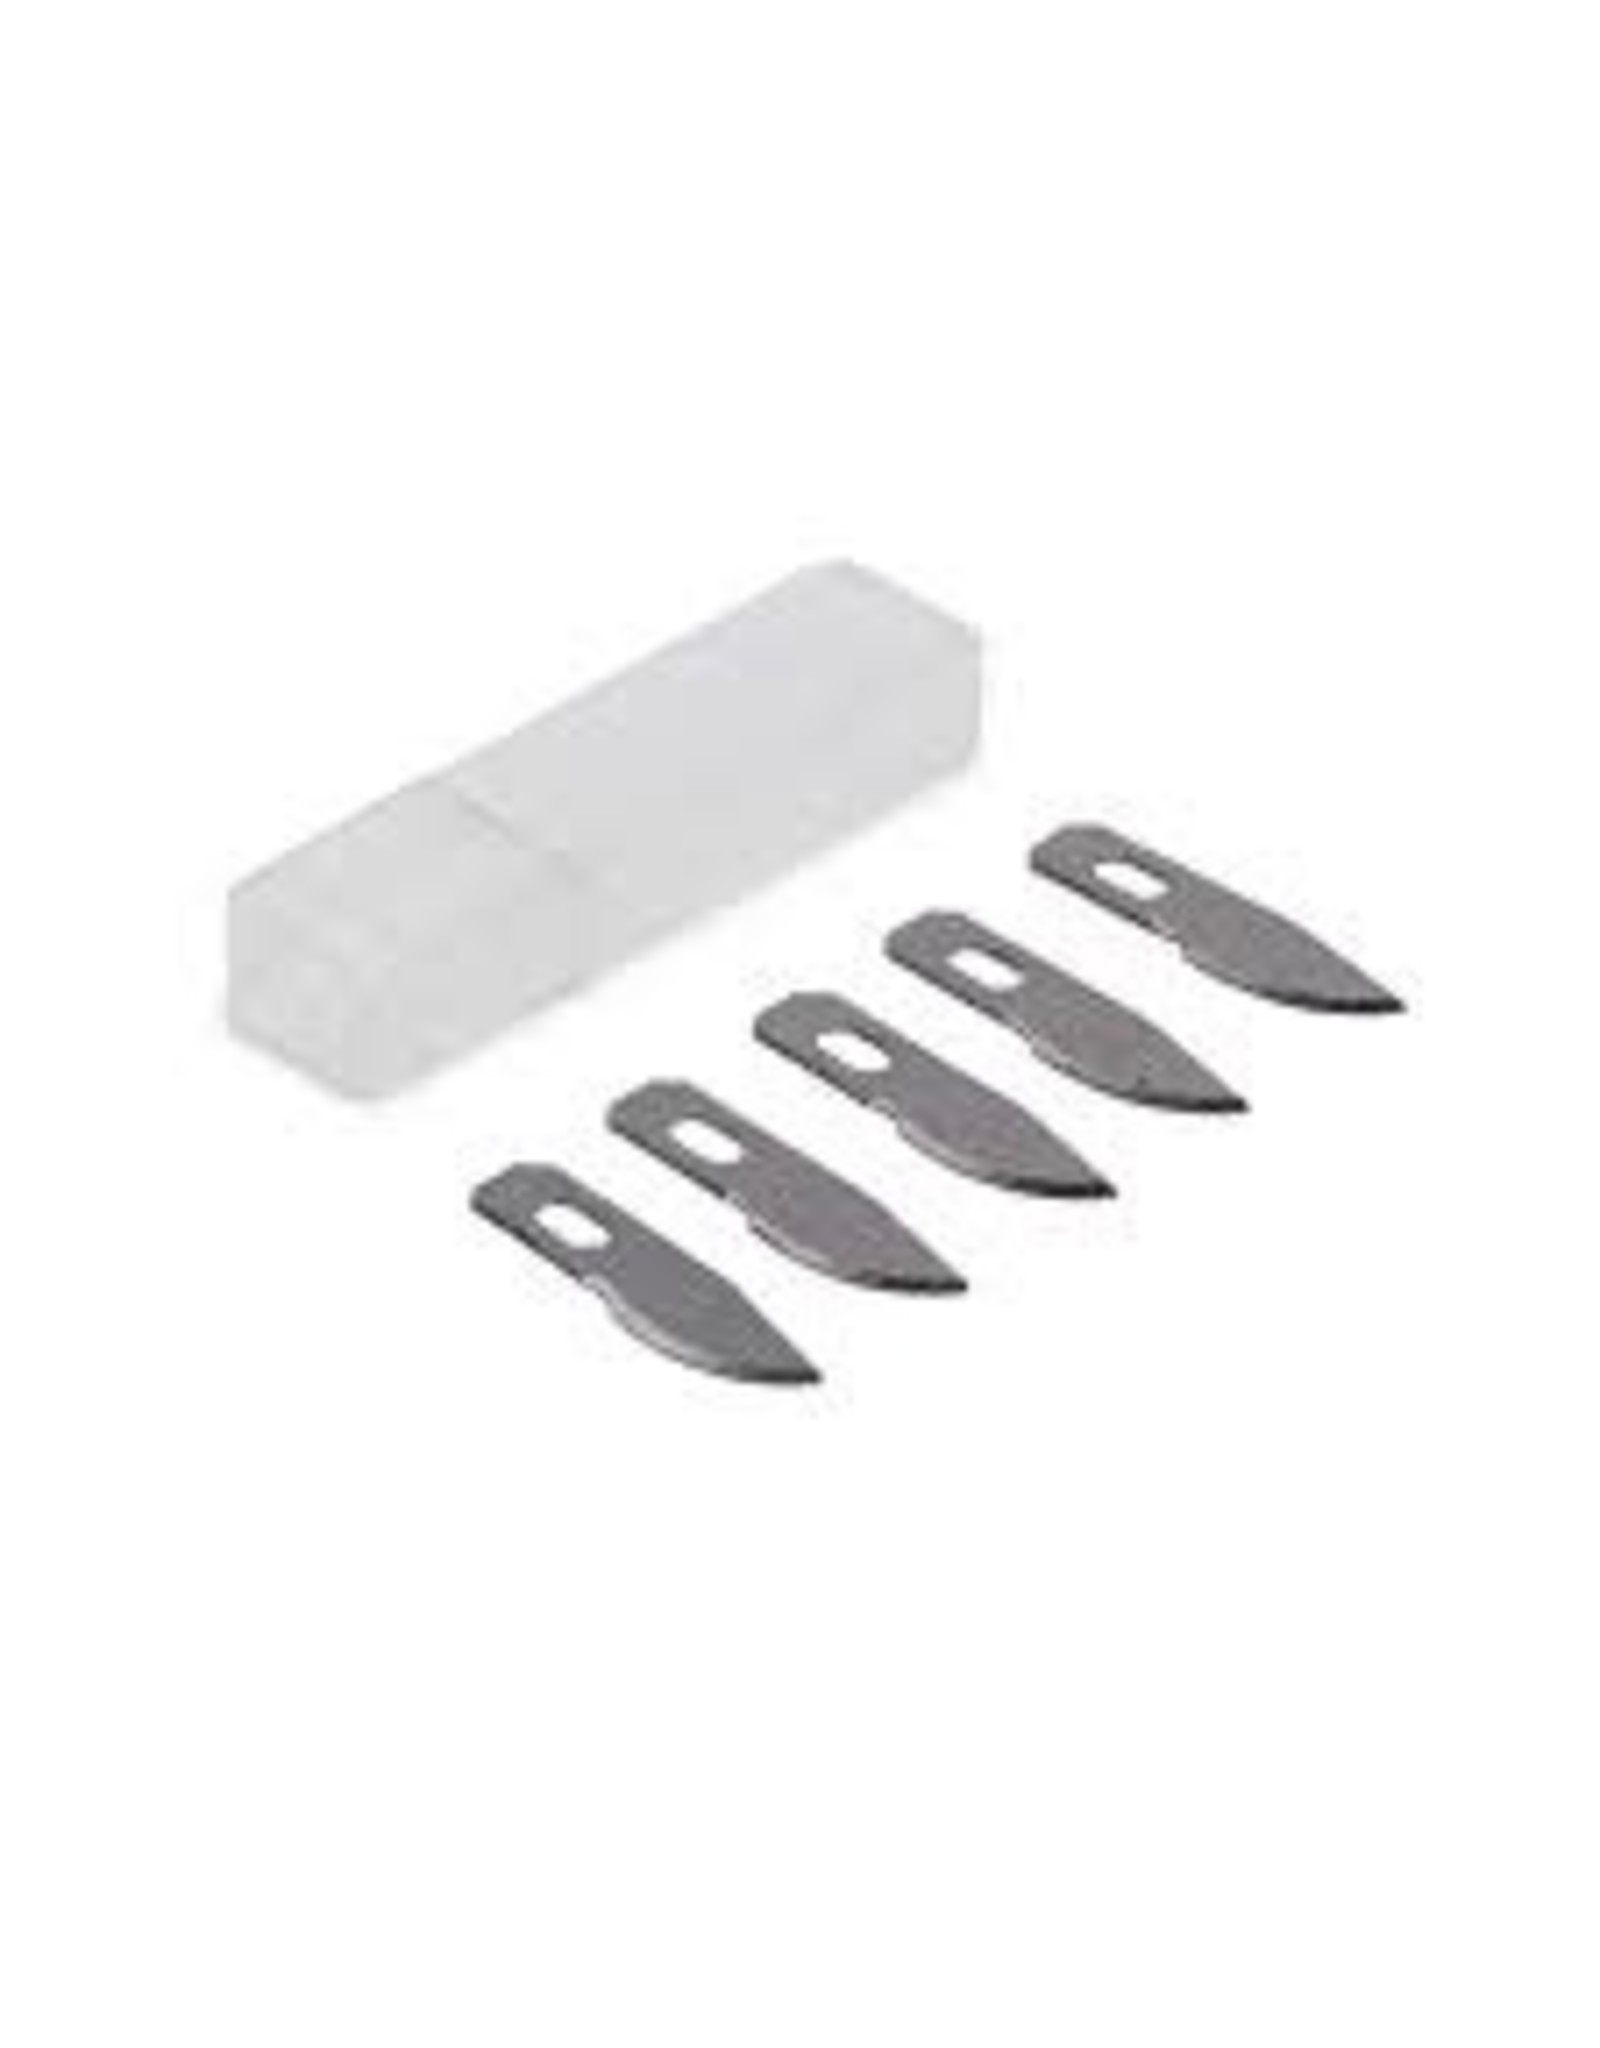 CLEARANCE #10 Curved Edge Blade - 5 pcs.